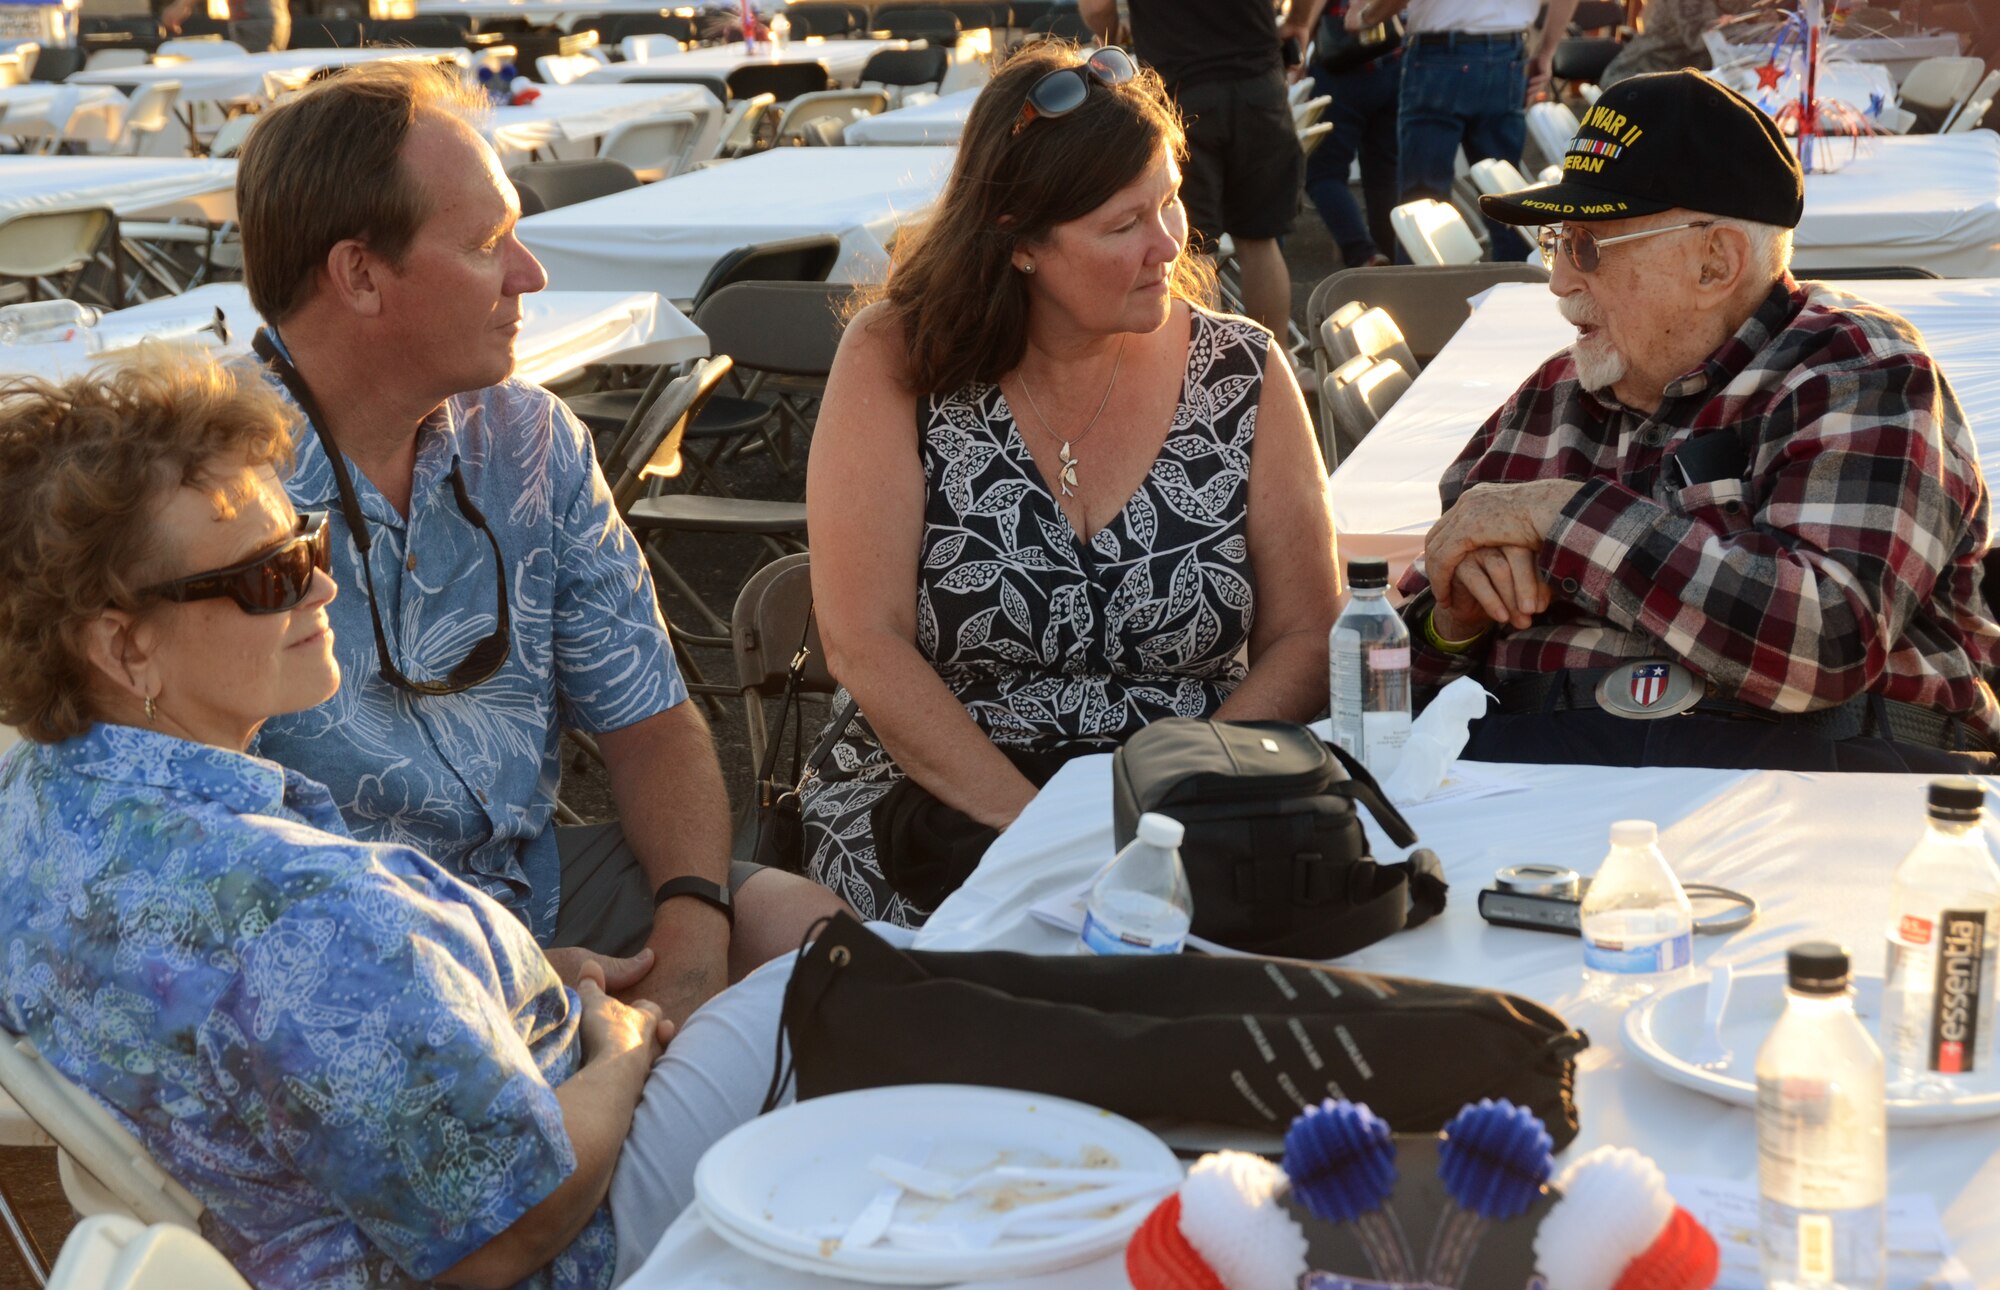 Fred Parrish, an original founding member of the Oregon Air National Guard, right, spends time with friends during the afterhours “All Call” celebration as part of the 75th Anniversary of the Oregon Air National Guard during the Oregon International Air Show, Hillsboro, Ore., Aug. 6, 2016. (U.S. Air National Guard photo by Tech. Sgt. John Hughel, 142nd Fighter Wing Public Affairs/Released).